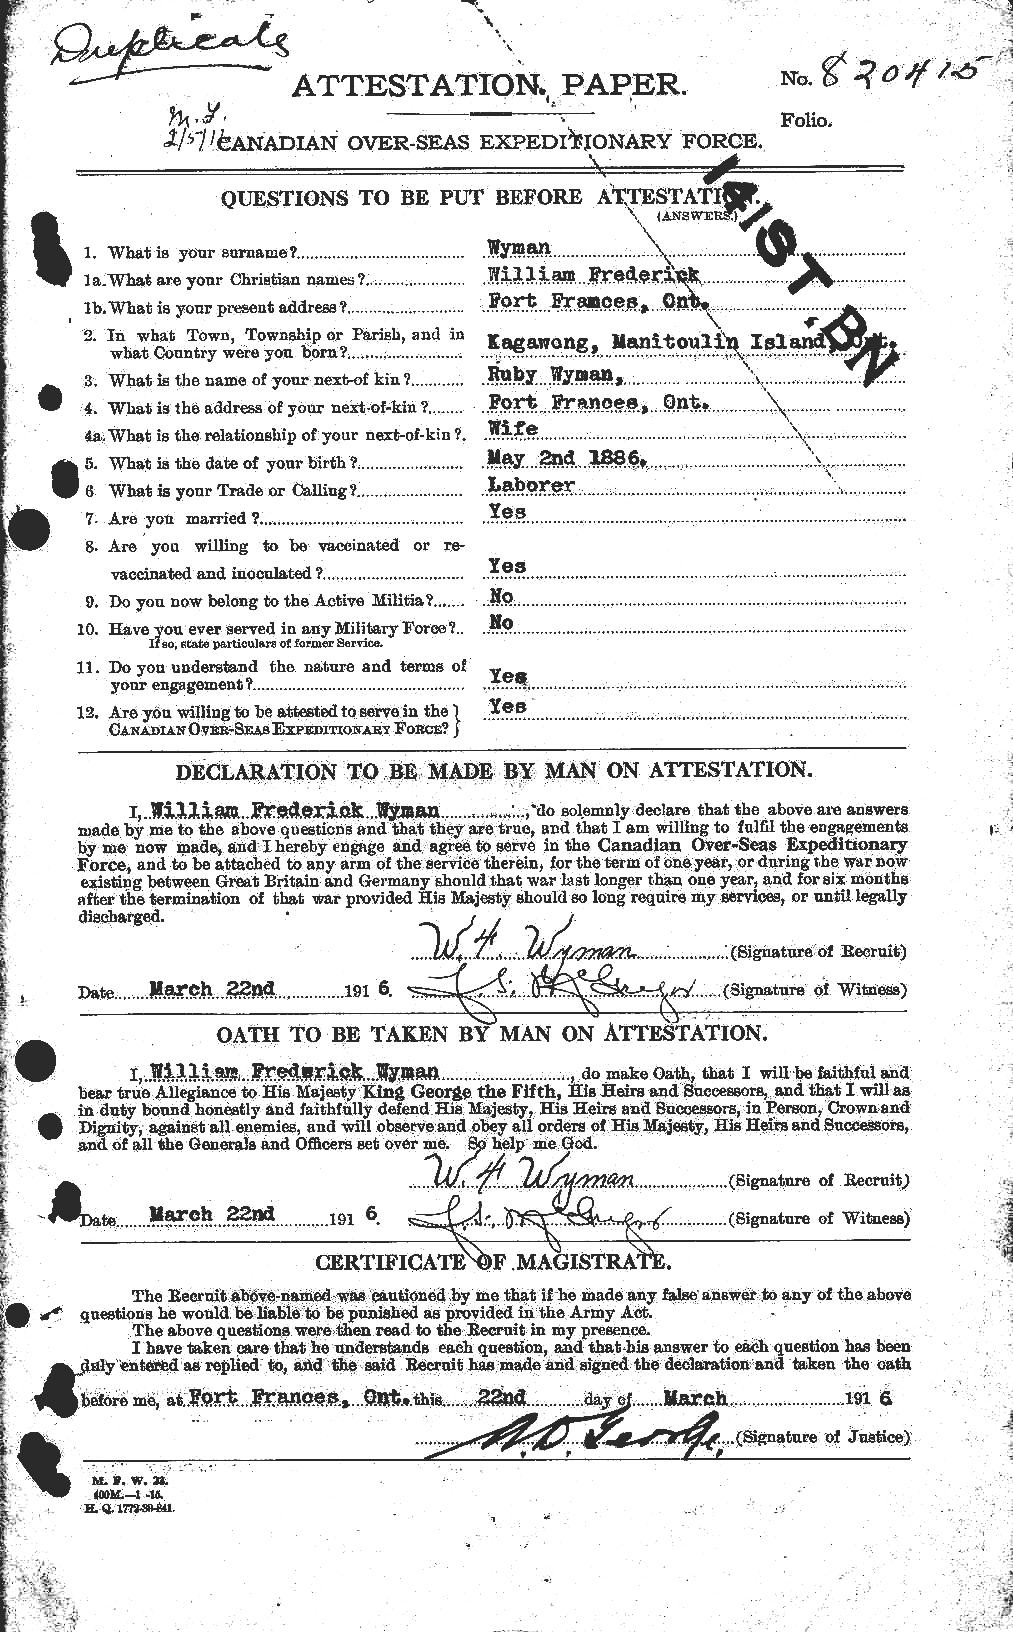 Personnel Records of the First World War - CEF 686862a